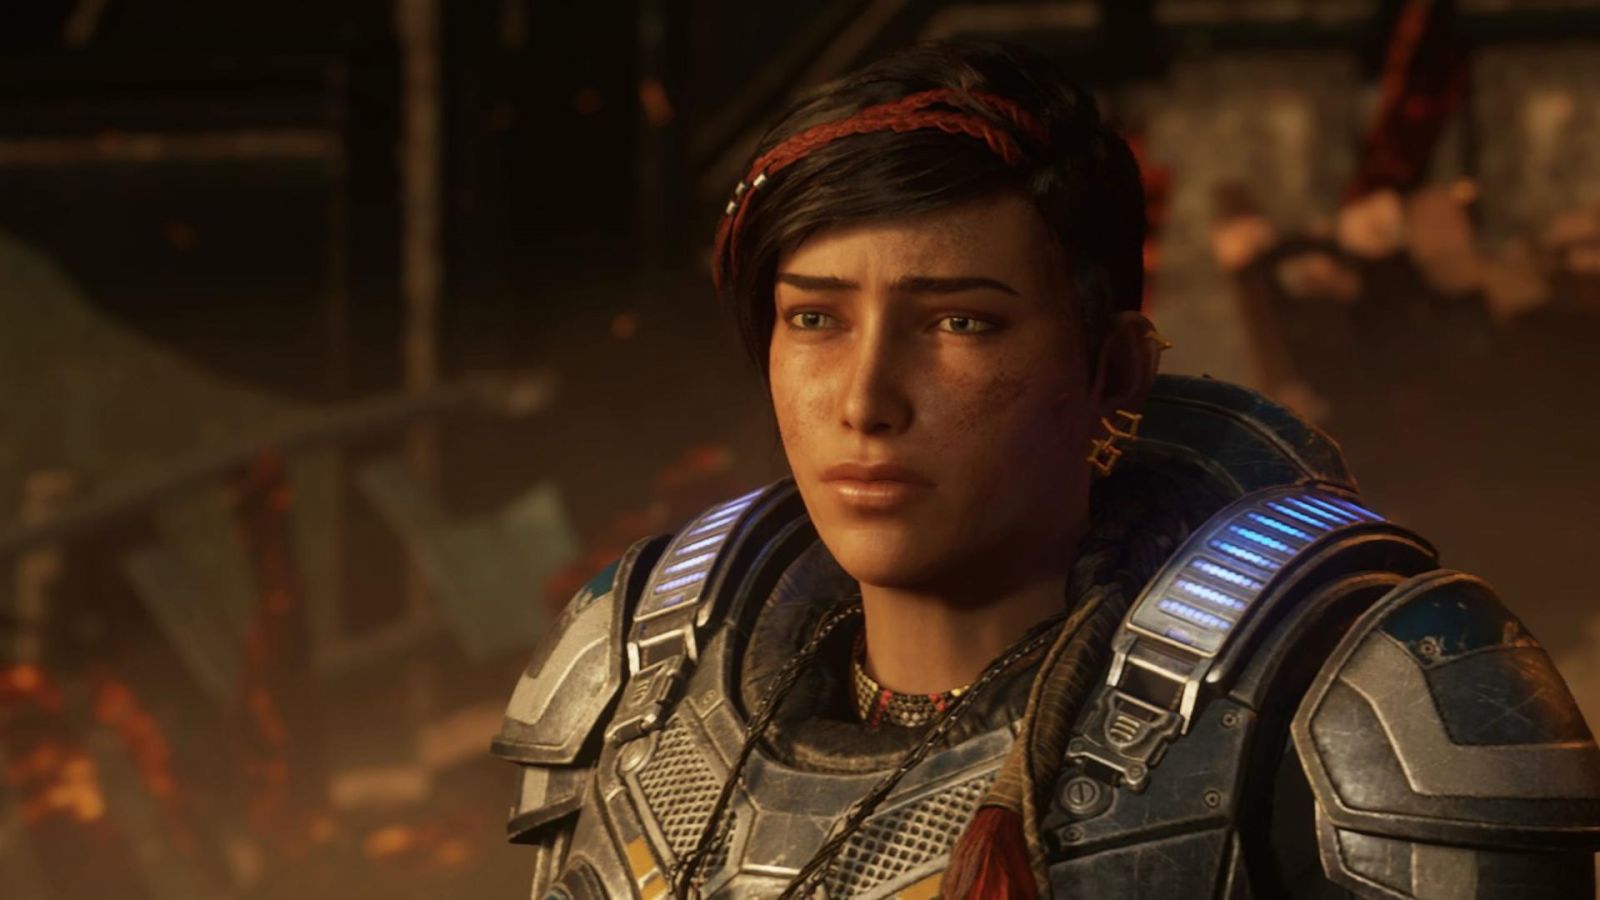 Review: Gears 5 